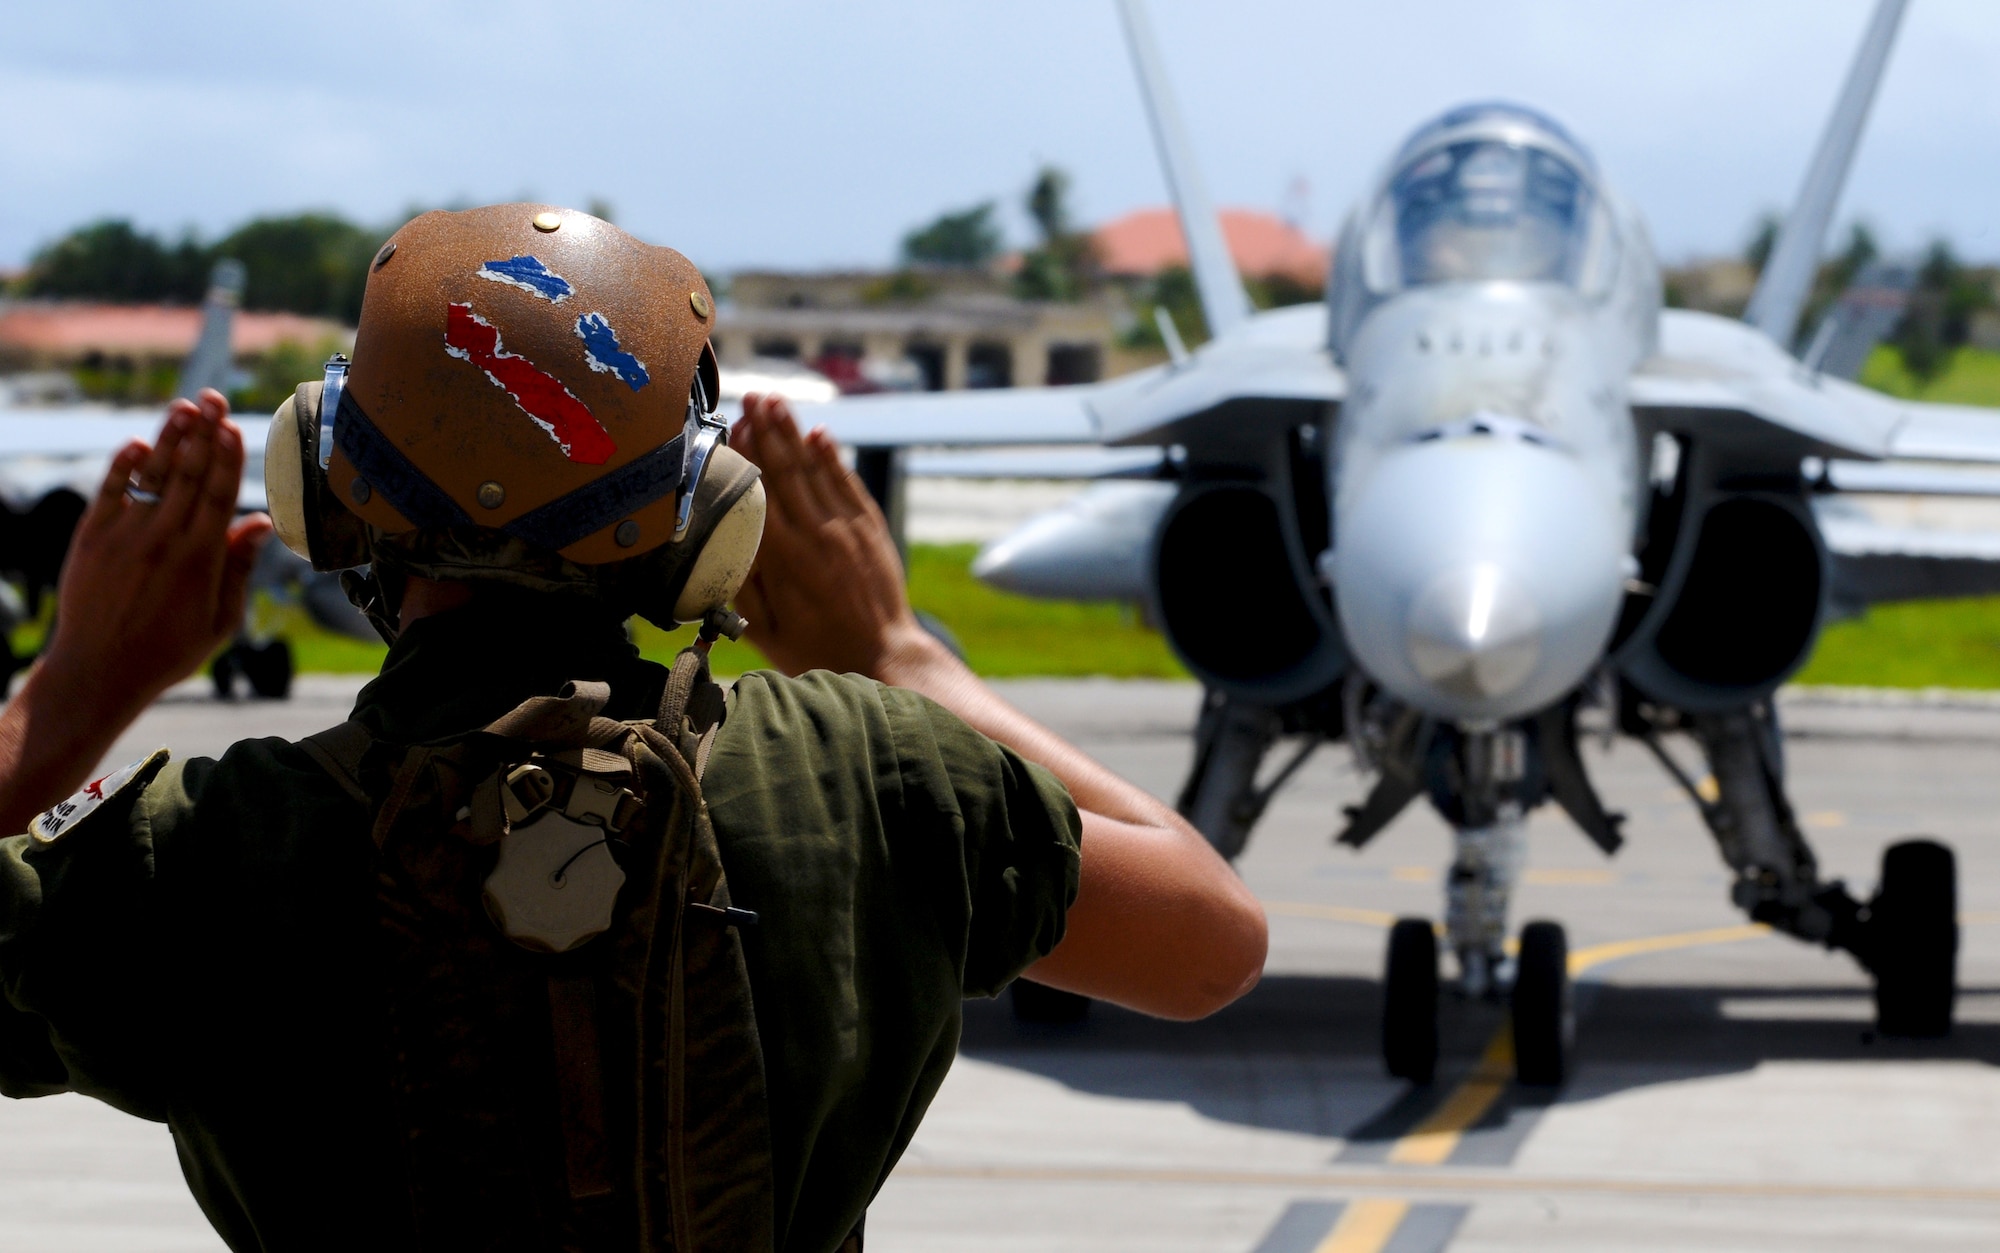 ANDERSEN AIR FORCE BASE, Guam—A U.S. Marine Corps crew chief guides an F/A-18 Hornet fighter jet into its parking space here, Oct. 20. Several units from Marine Corps Air station Iwakuni, Japan, came to conduct aerial and ground training at Andersen. (U.S. Air Force photo by Senior Airman Benjamin Wiseman/Released)